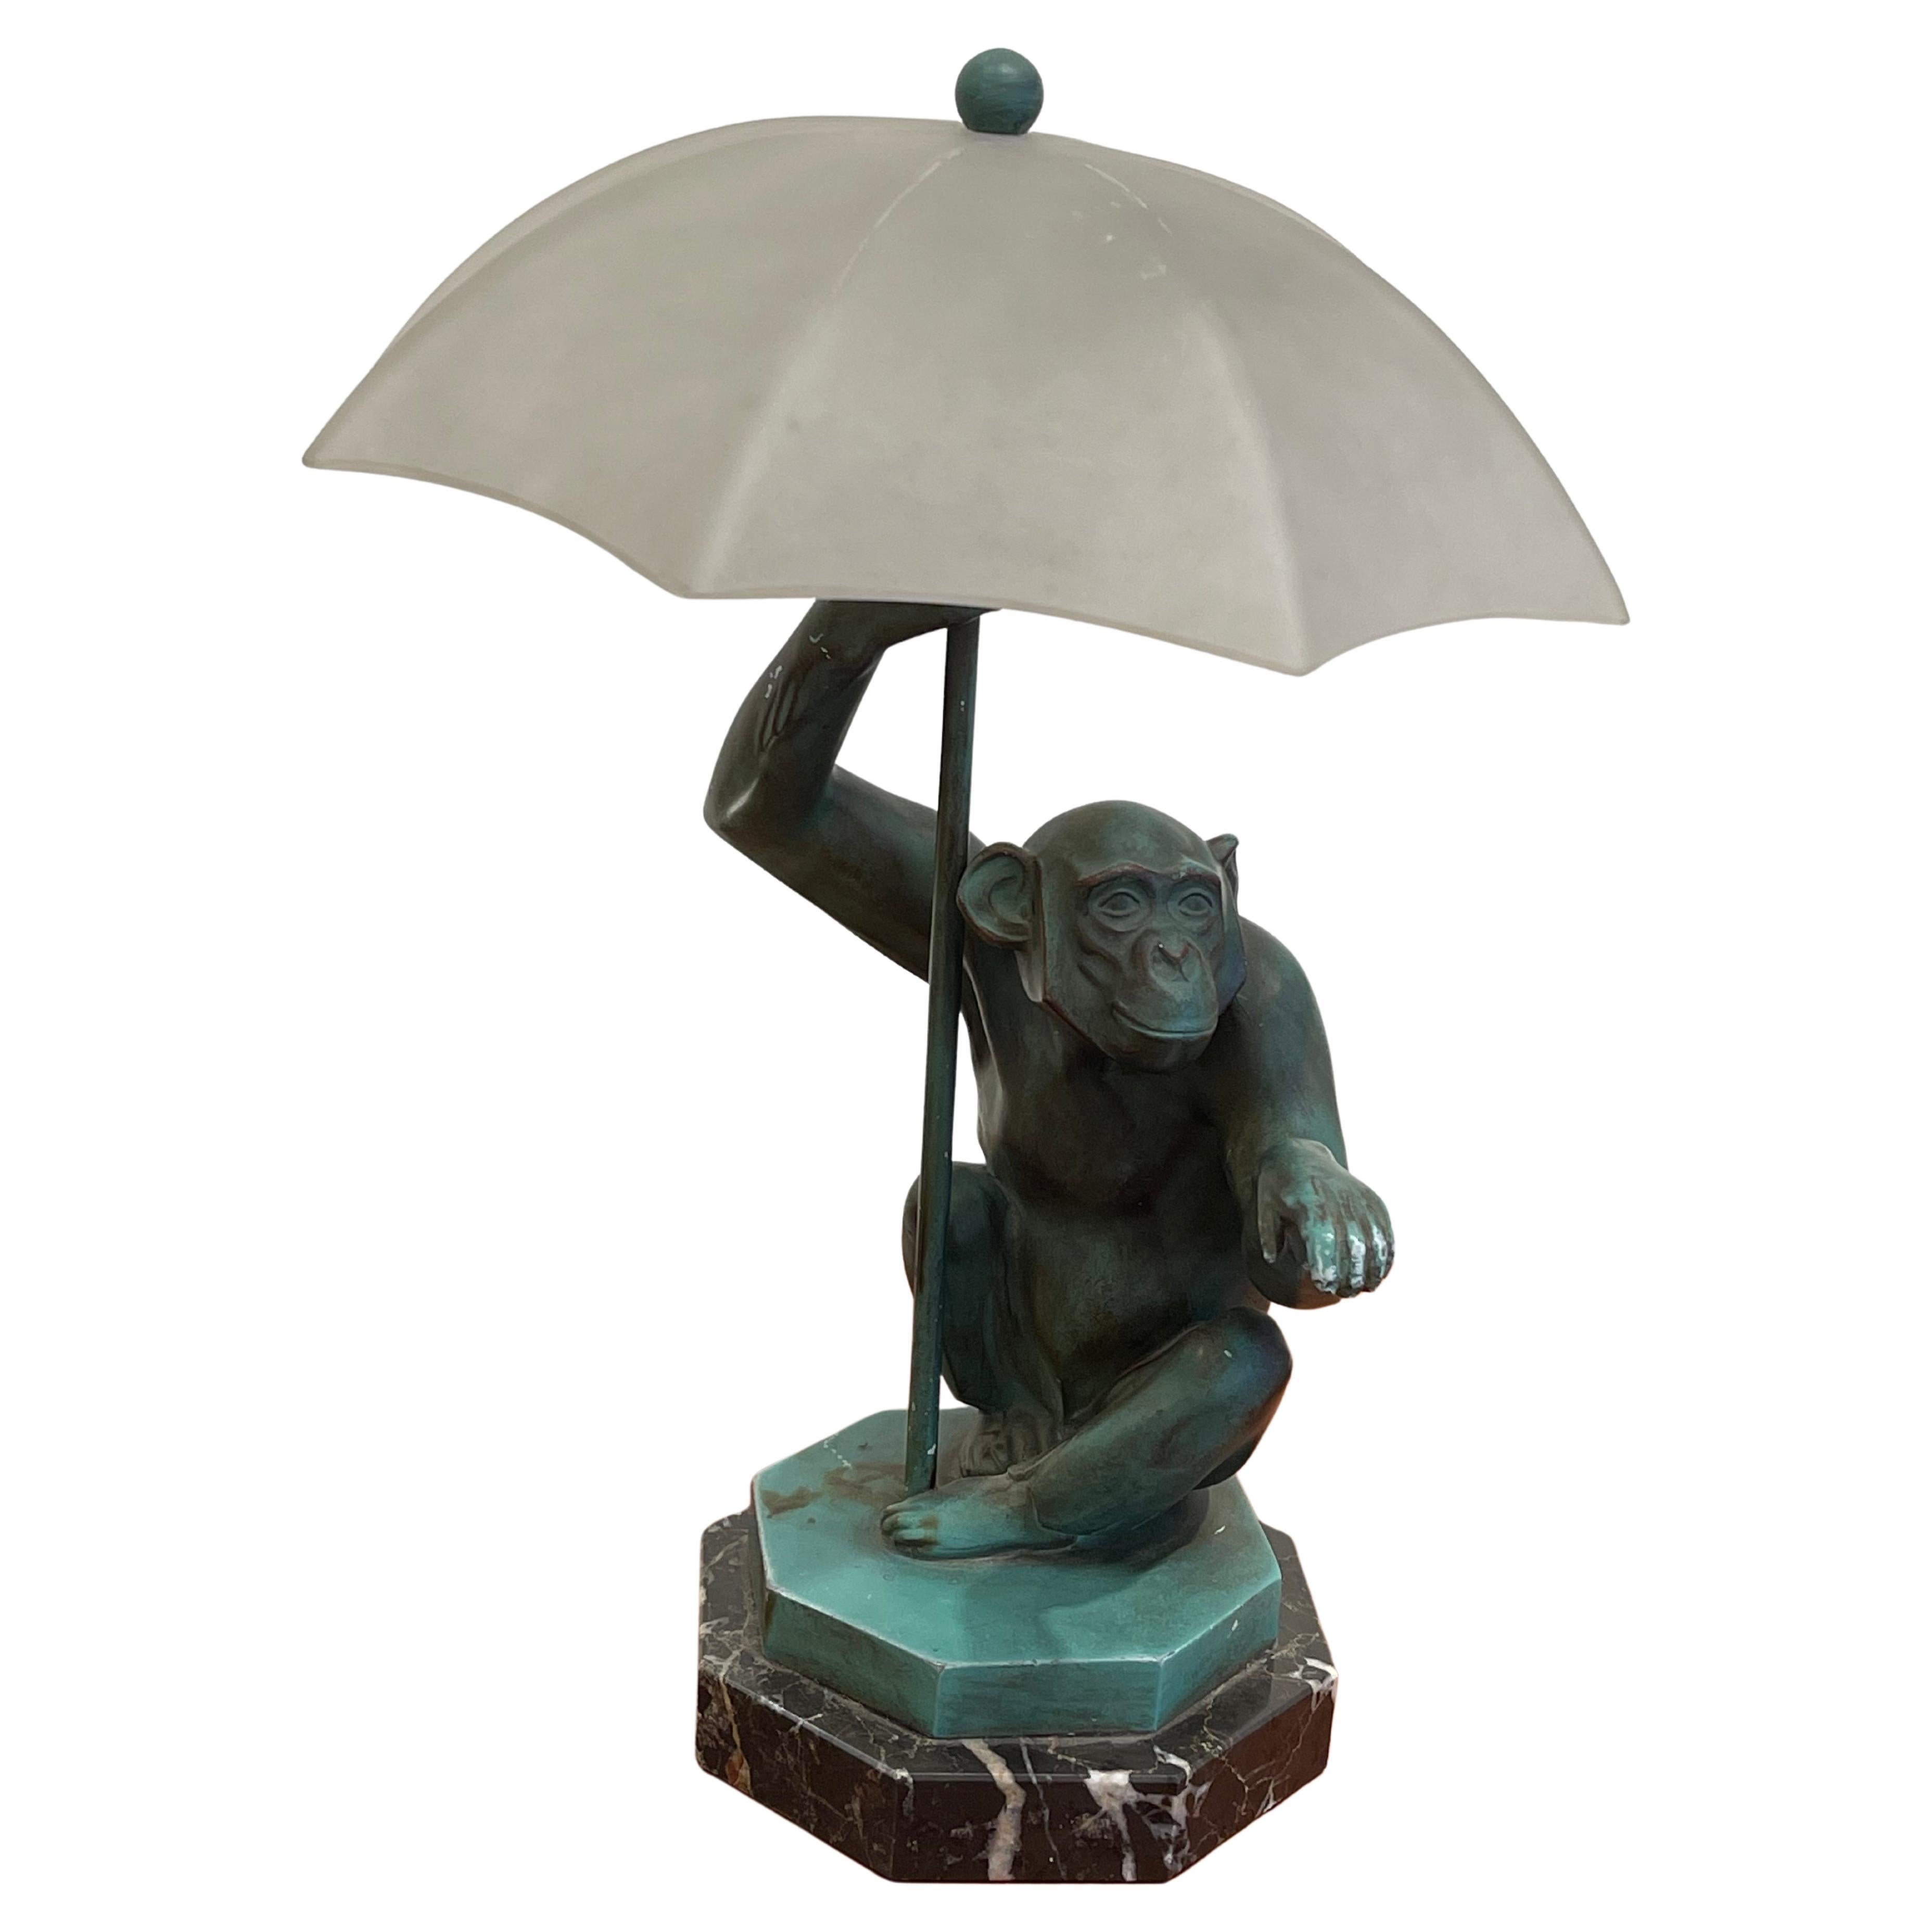 Exceptional Sculpture/Lamp of a Monkey with an Umbrella by Le Verrier, Art Deco